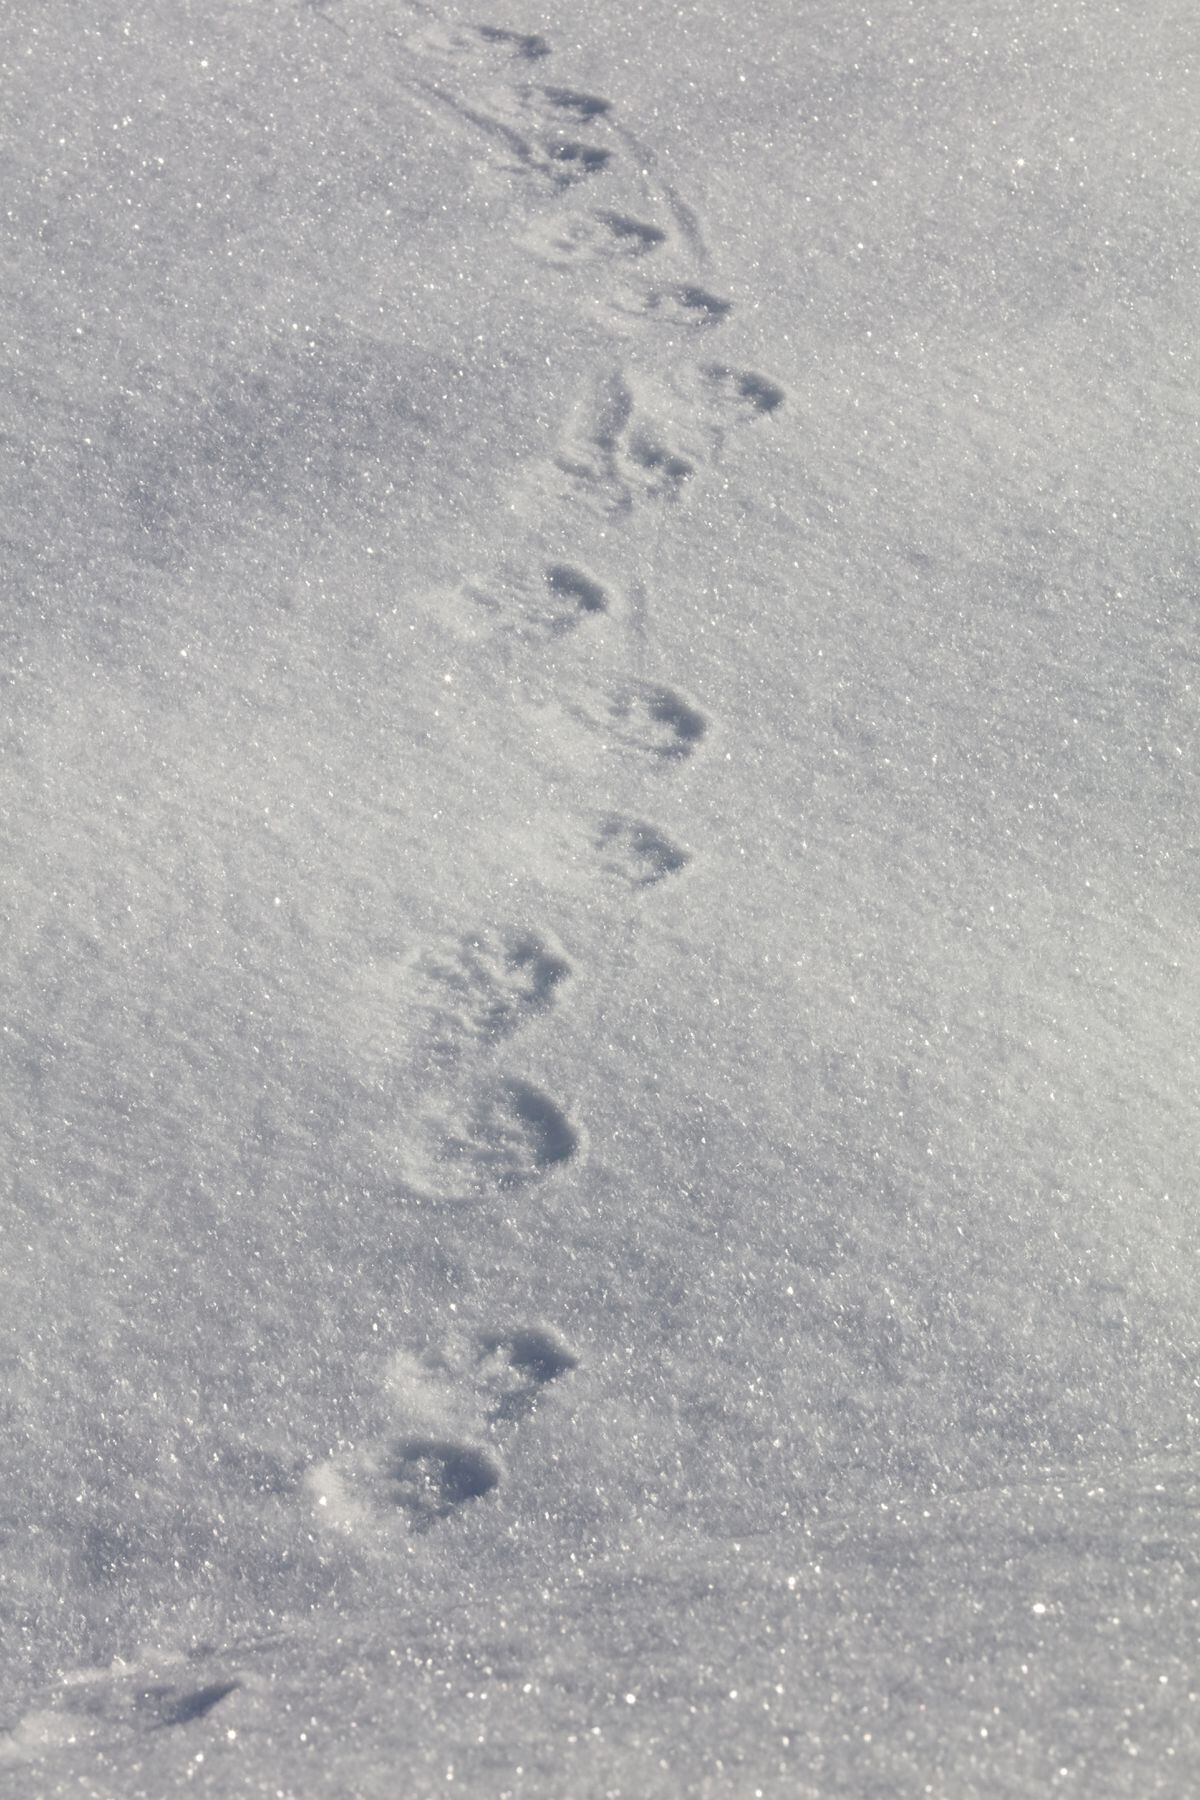 Tracks in the snow can tell amazing stories - Anchorage Daily News